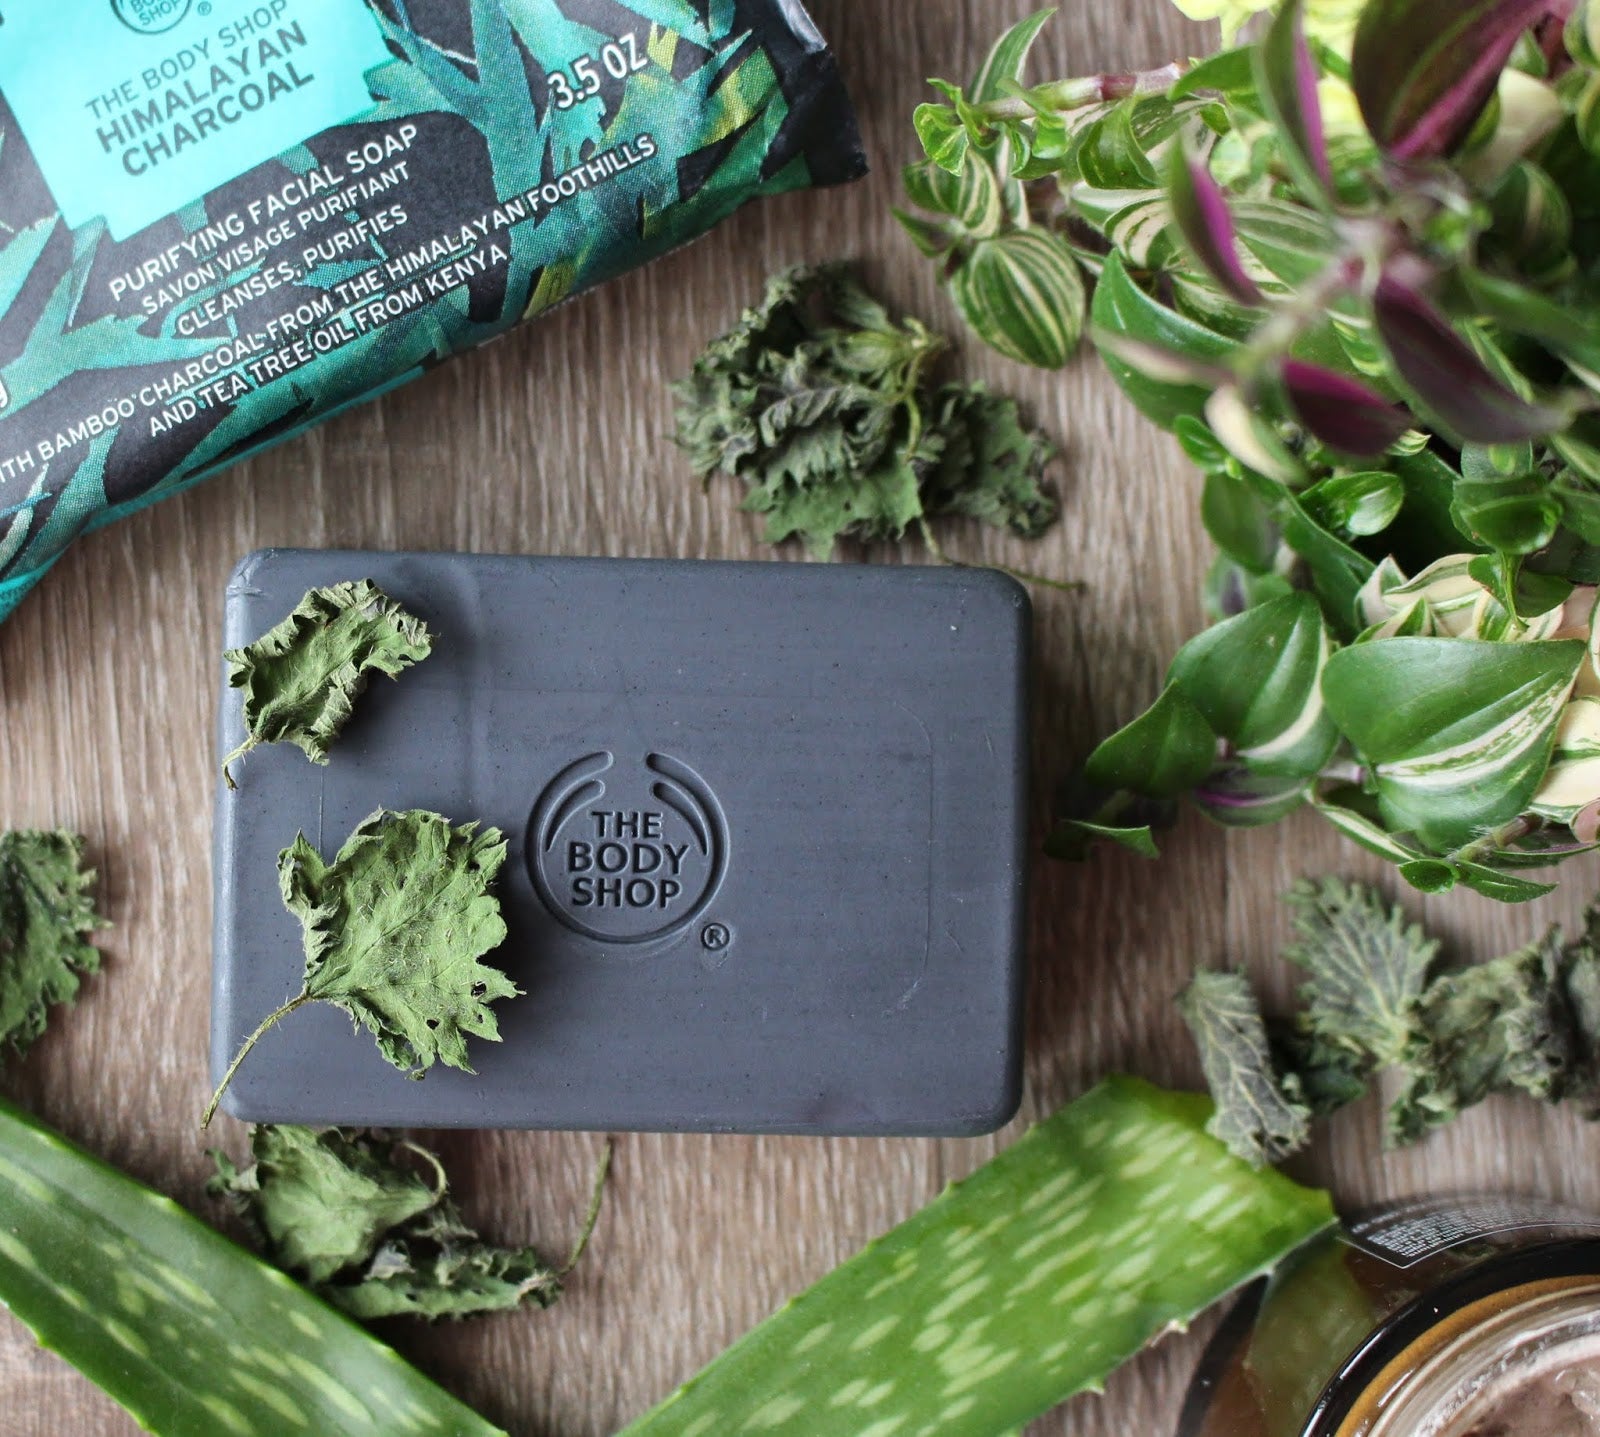 The Body Shop Himalayan Charcoal Soap-Meharshop